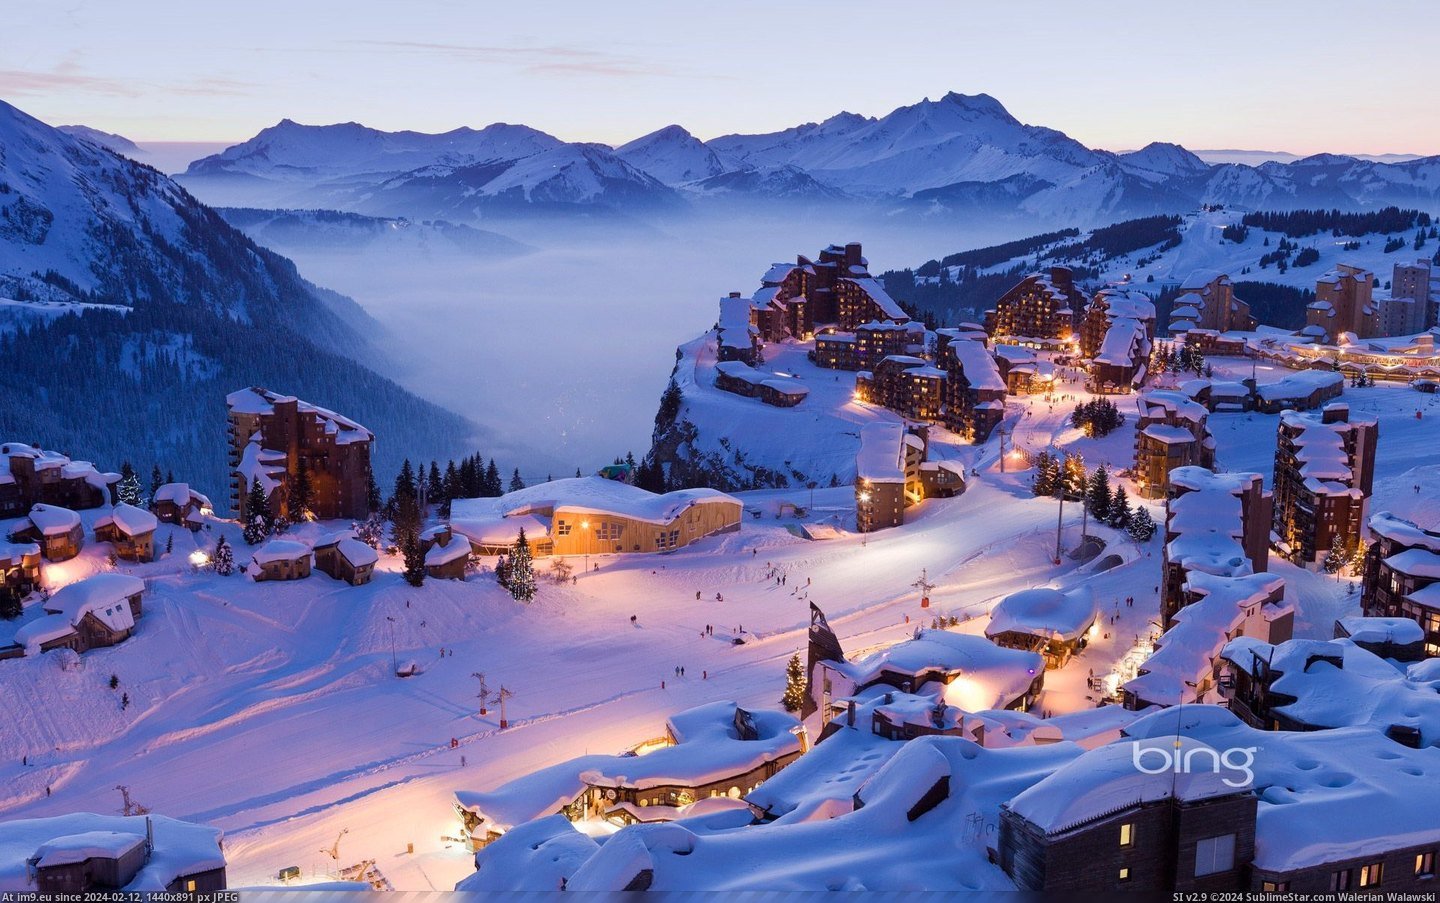 Avoriaz, France (©Getty Images) (in Best photos of January 2013)